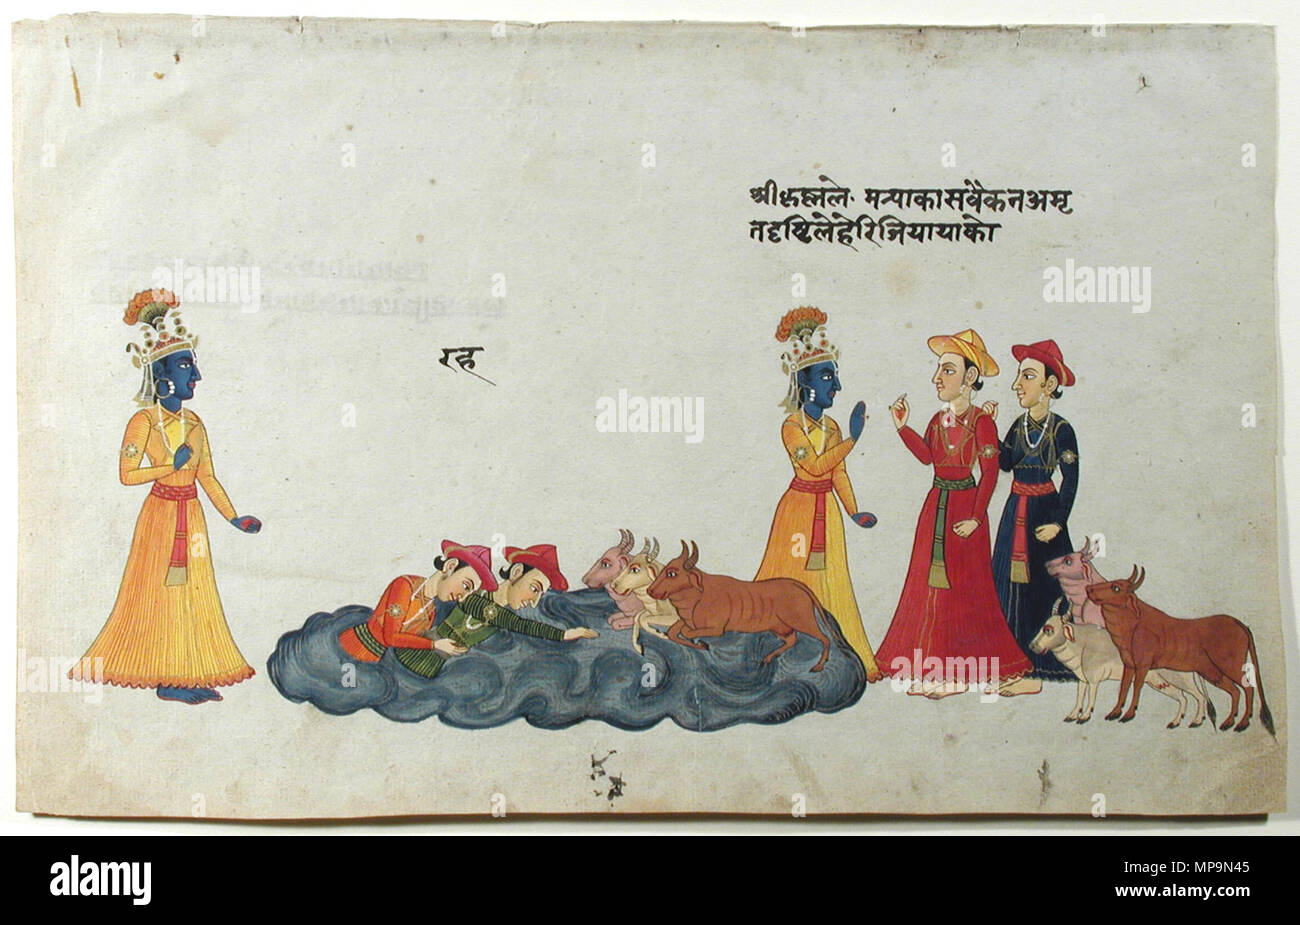 . English: Series Title: The Ancient Text of the Lord Suite Name: Bhagavata Purana Creation Date: after 1825 Display Dimensions: 7 5/16 in. x 11 25/32 in. (18.6 cm x 29.9 cm) Credit Line: Edwin Binney 3rd Collection Accession Number: 1990.175 Collection: <a href='http://www.sdmart.org/art/our-collection/asian-art' rel='nofollow'>The San Diego Museum of Art</a> . 1 October 2001, 16:04:11. English: thesandiegomuseumofartcollection 776 Krishna watches his companions and three cows swim (6124515099) Stock Photo